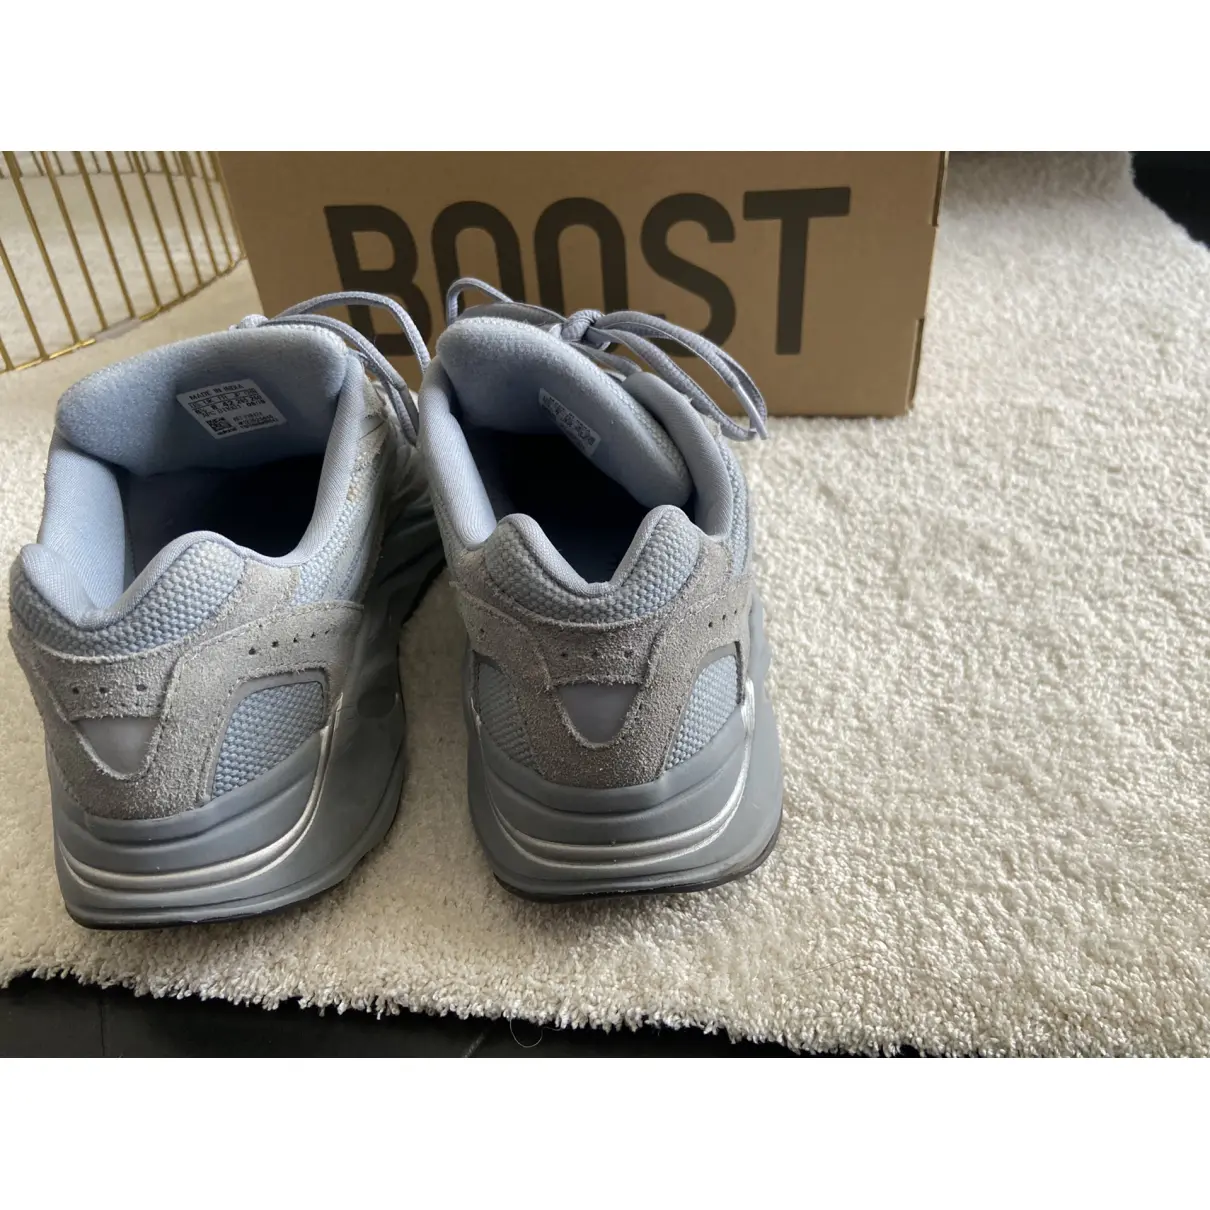 Boost 700 V2 low trainers Yeezy x Adidas